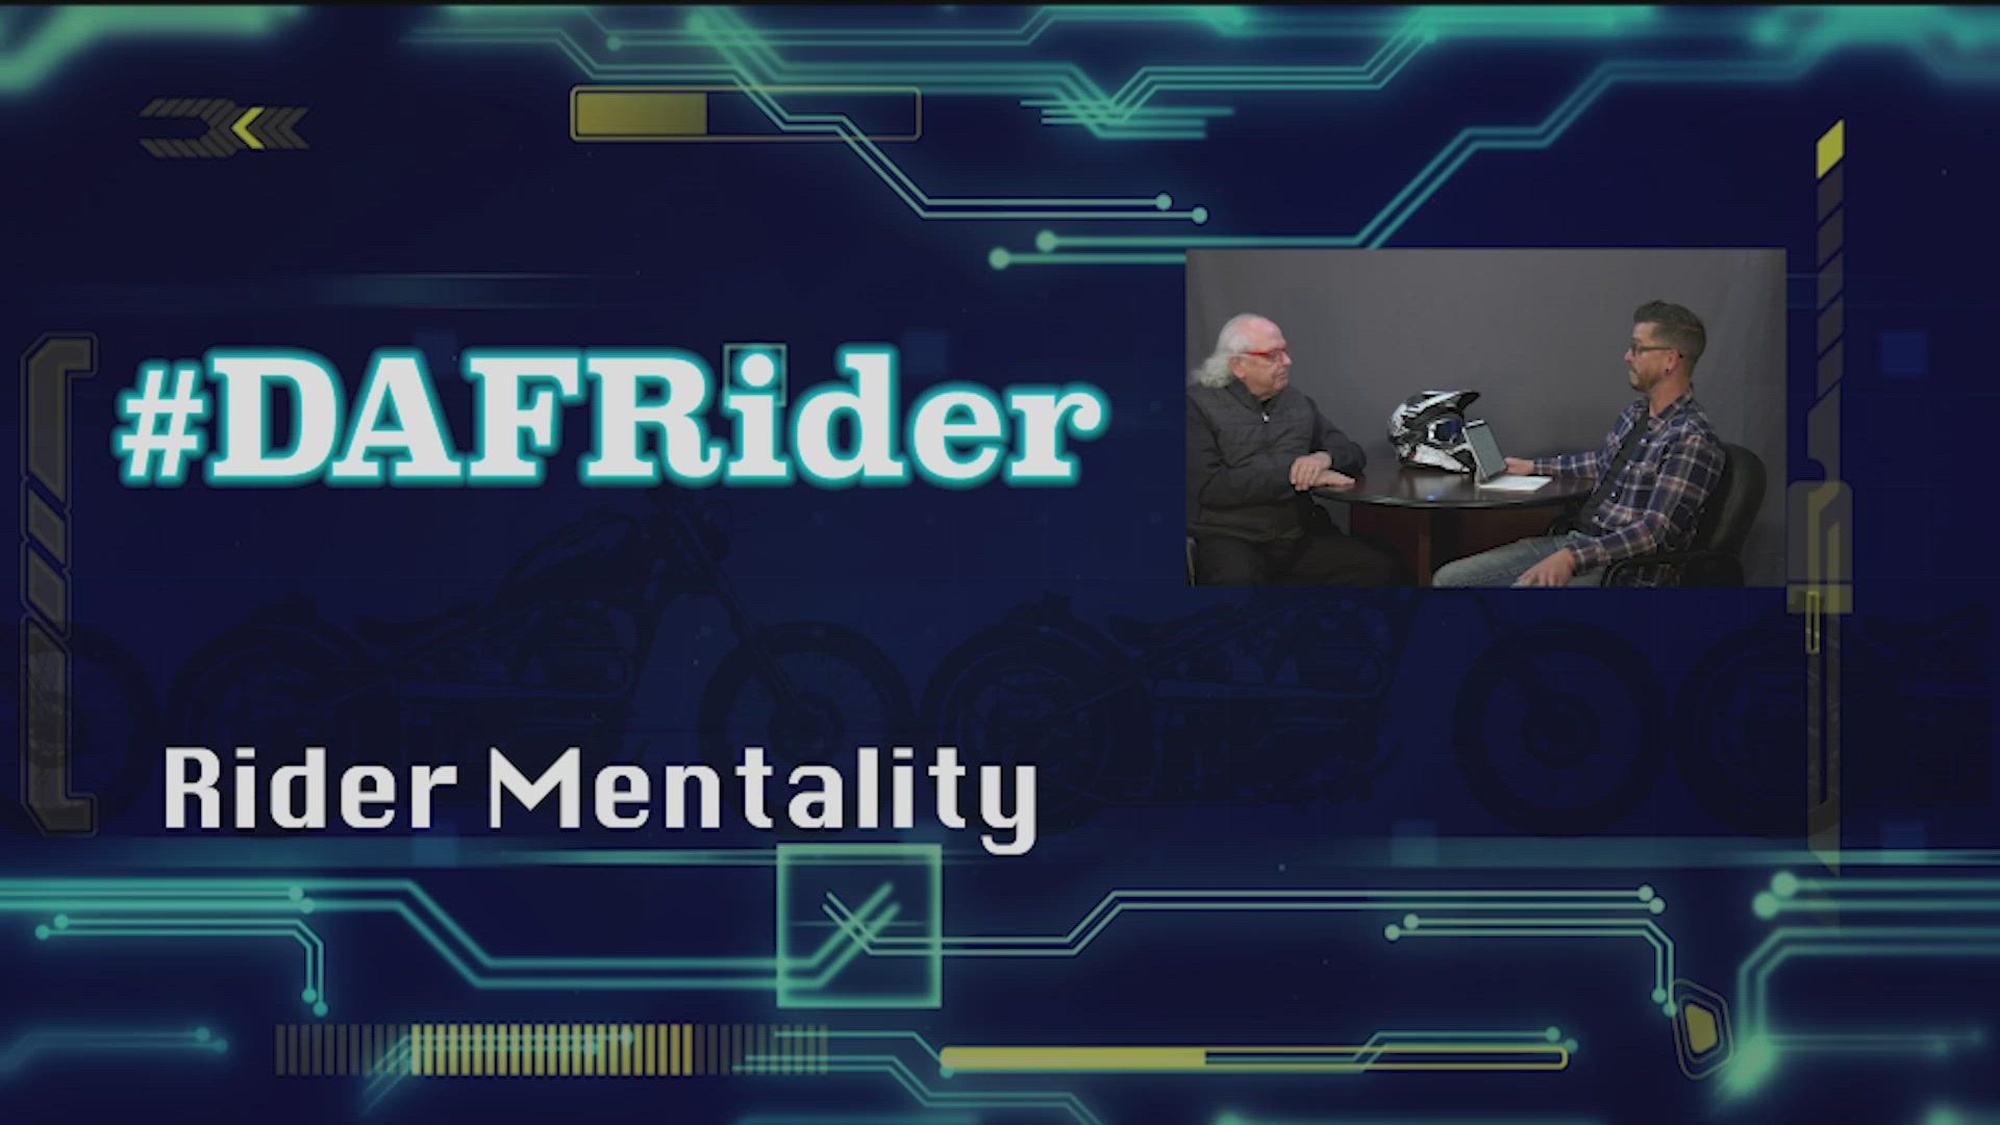 In this episode of the DAFRider series, Dave Brandt talks to Leonard "Dr. Love" Jones about the motorcycle rider mentality and what made him rethink motorcycle riding.